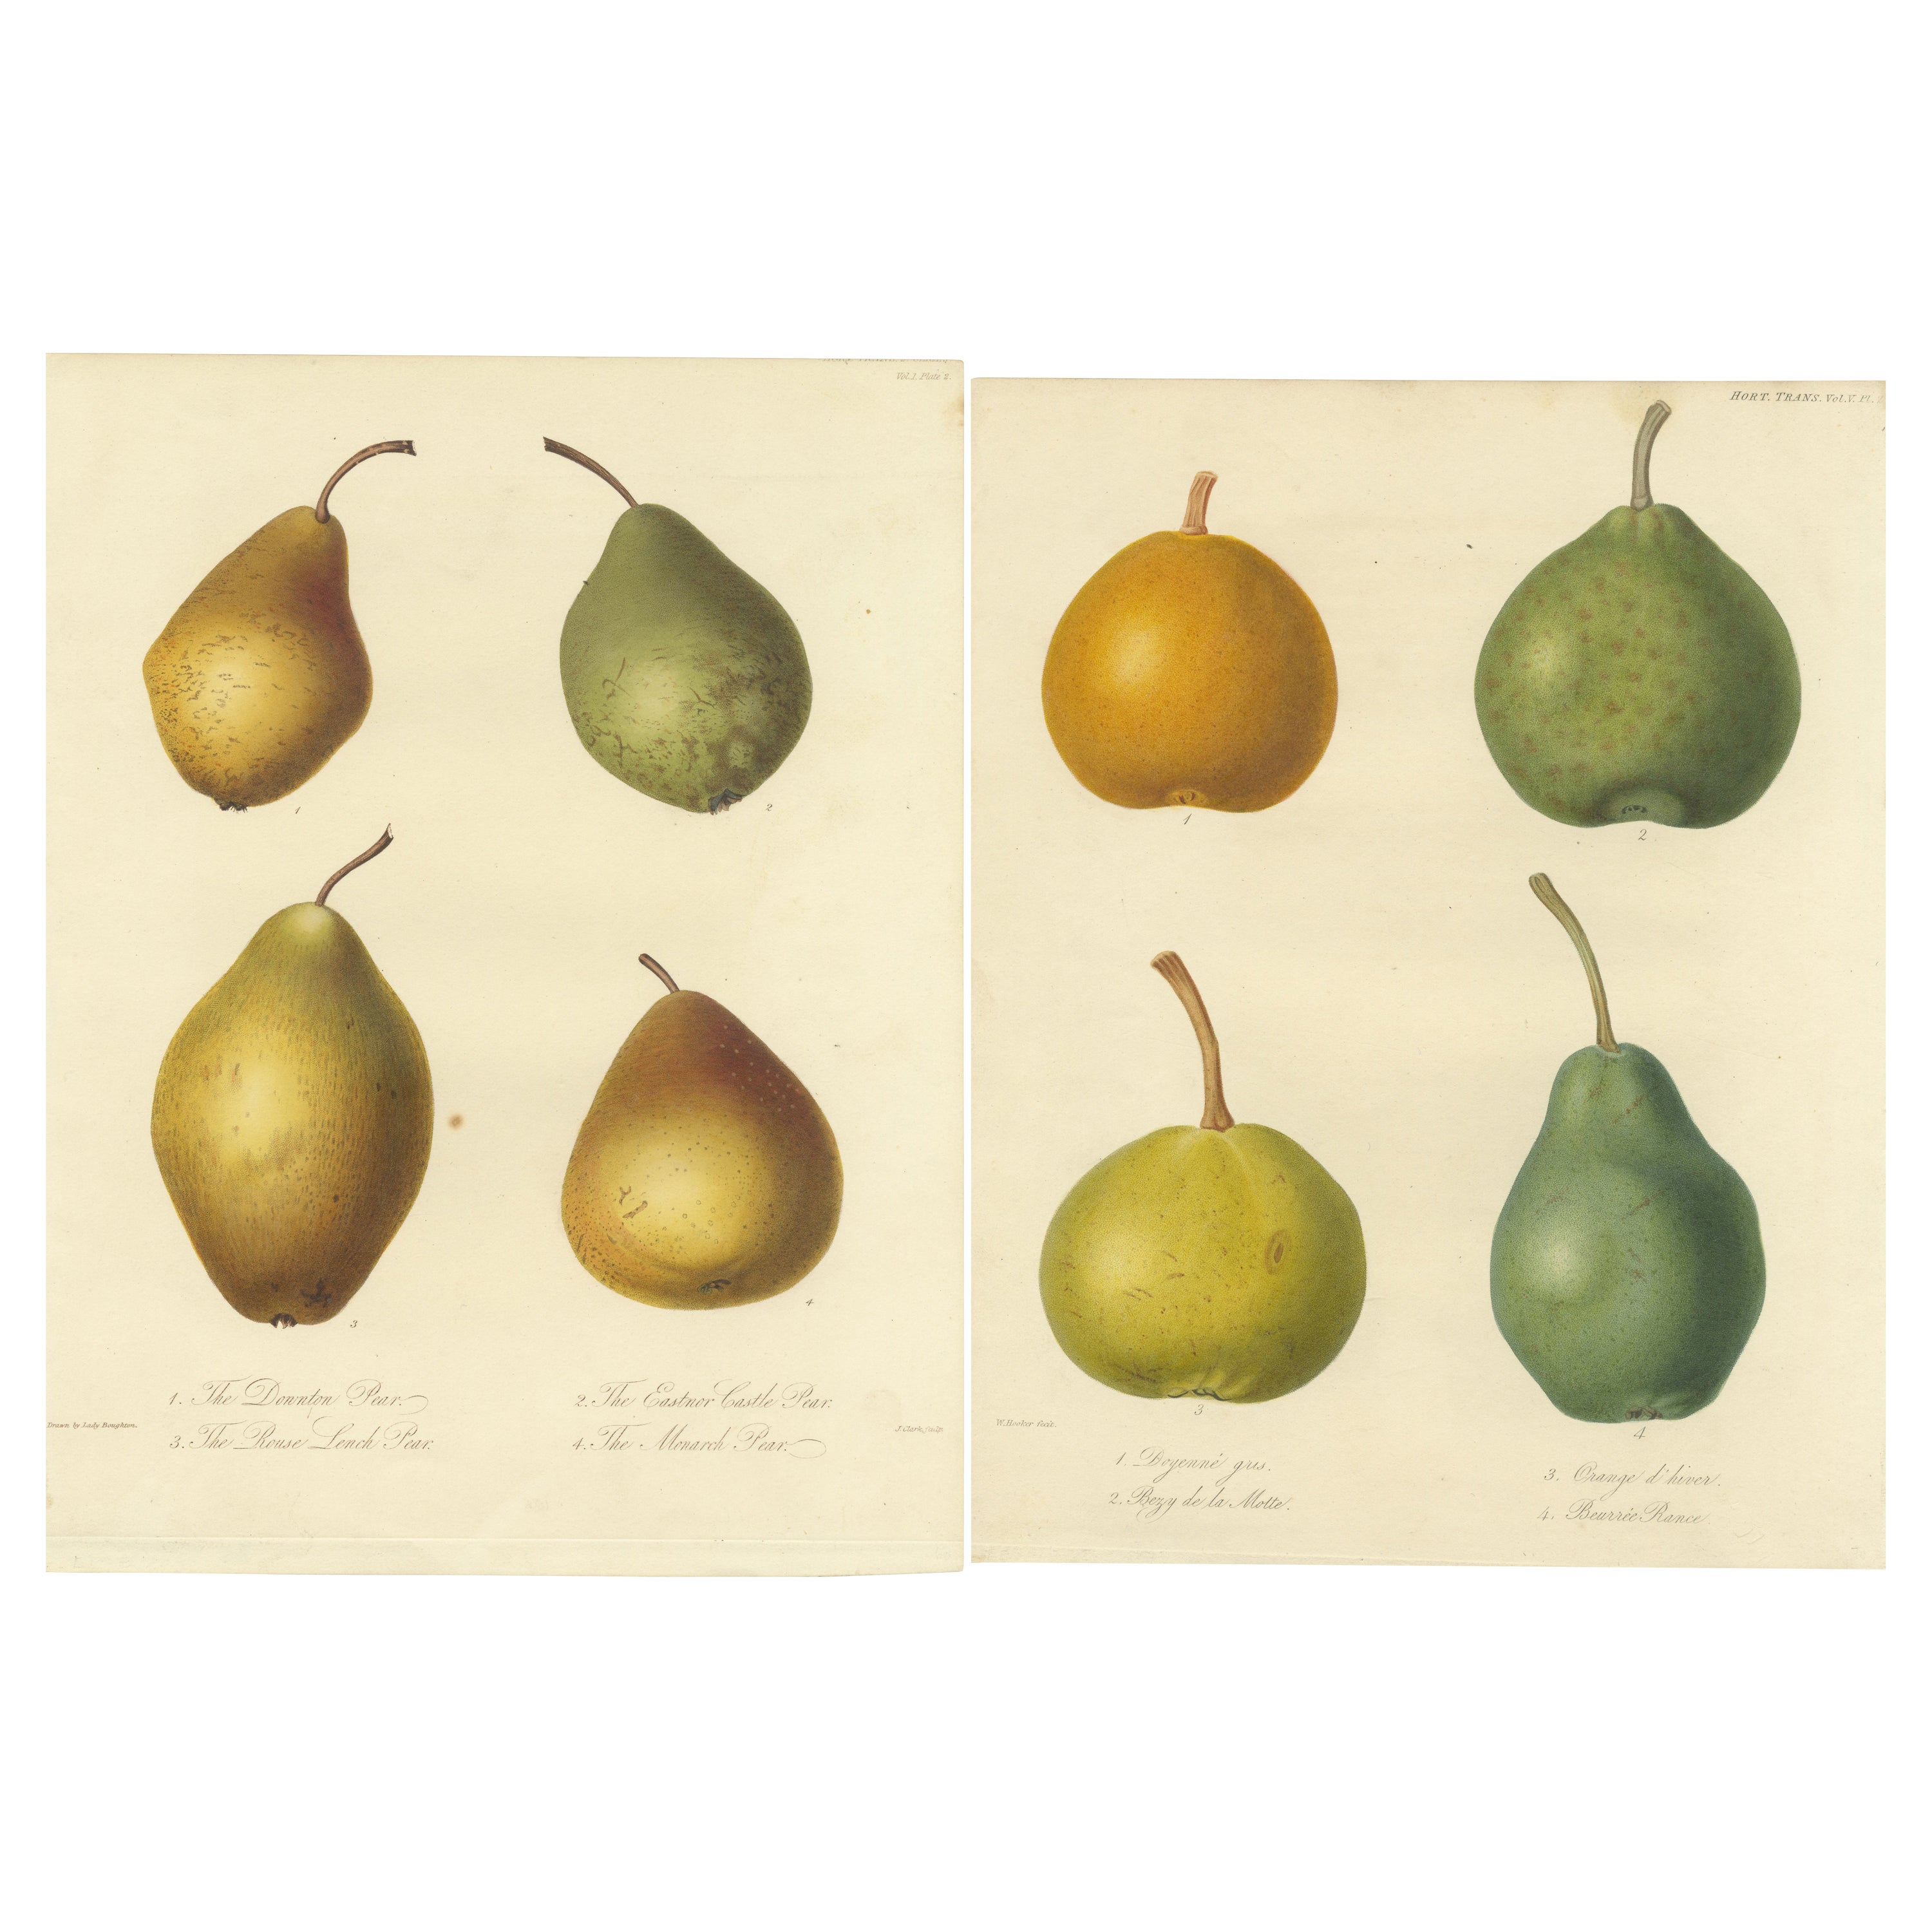 Set of 2 Antique Prints of the Downton Pear, Monarch Pear and Others